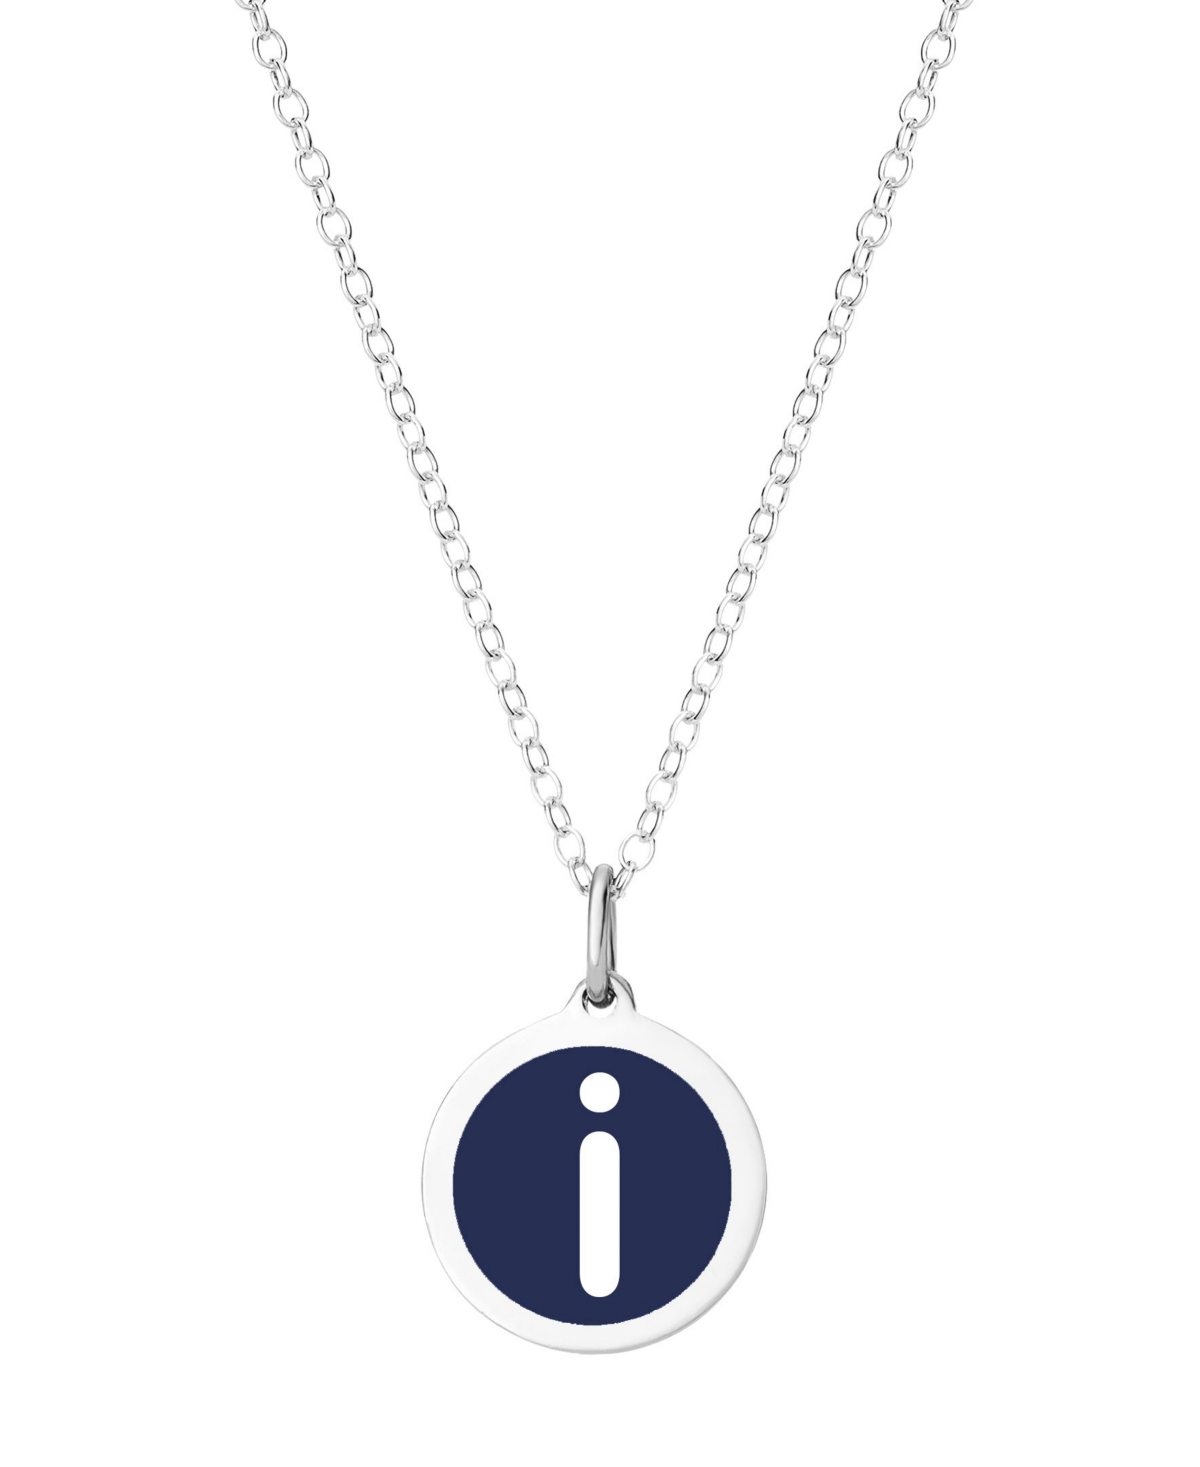 Mini Initial Pendant Necklace in Sterling Silver and Navy Enamel, 16" + 2" Extender - Navy-Y